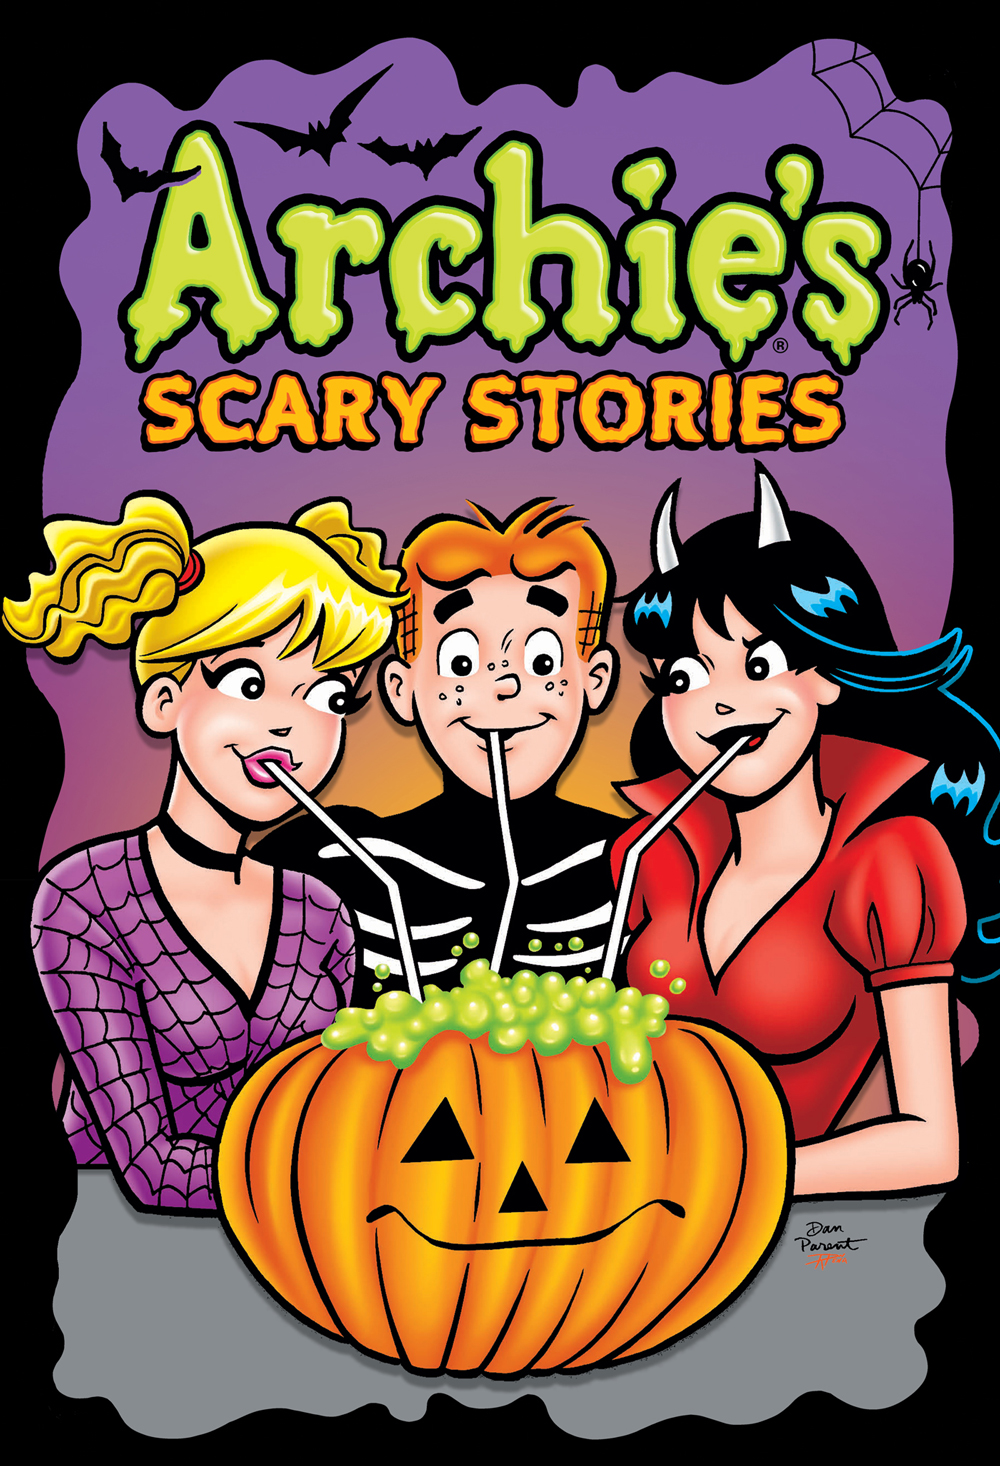 Betty, Archie, and Veronica, wearing Halloween costumes, all sip from straws dipped into a jack-o-lantern filled with bubbling green liquid. They're in front of a purple background with decoarative Halloween bats and spiders.